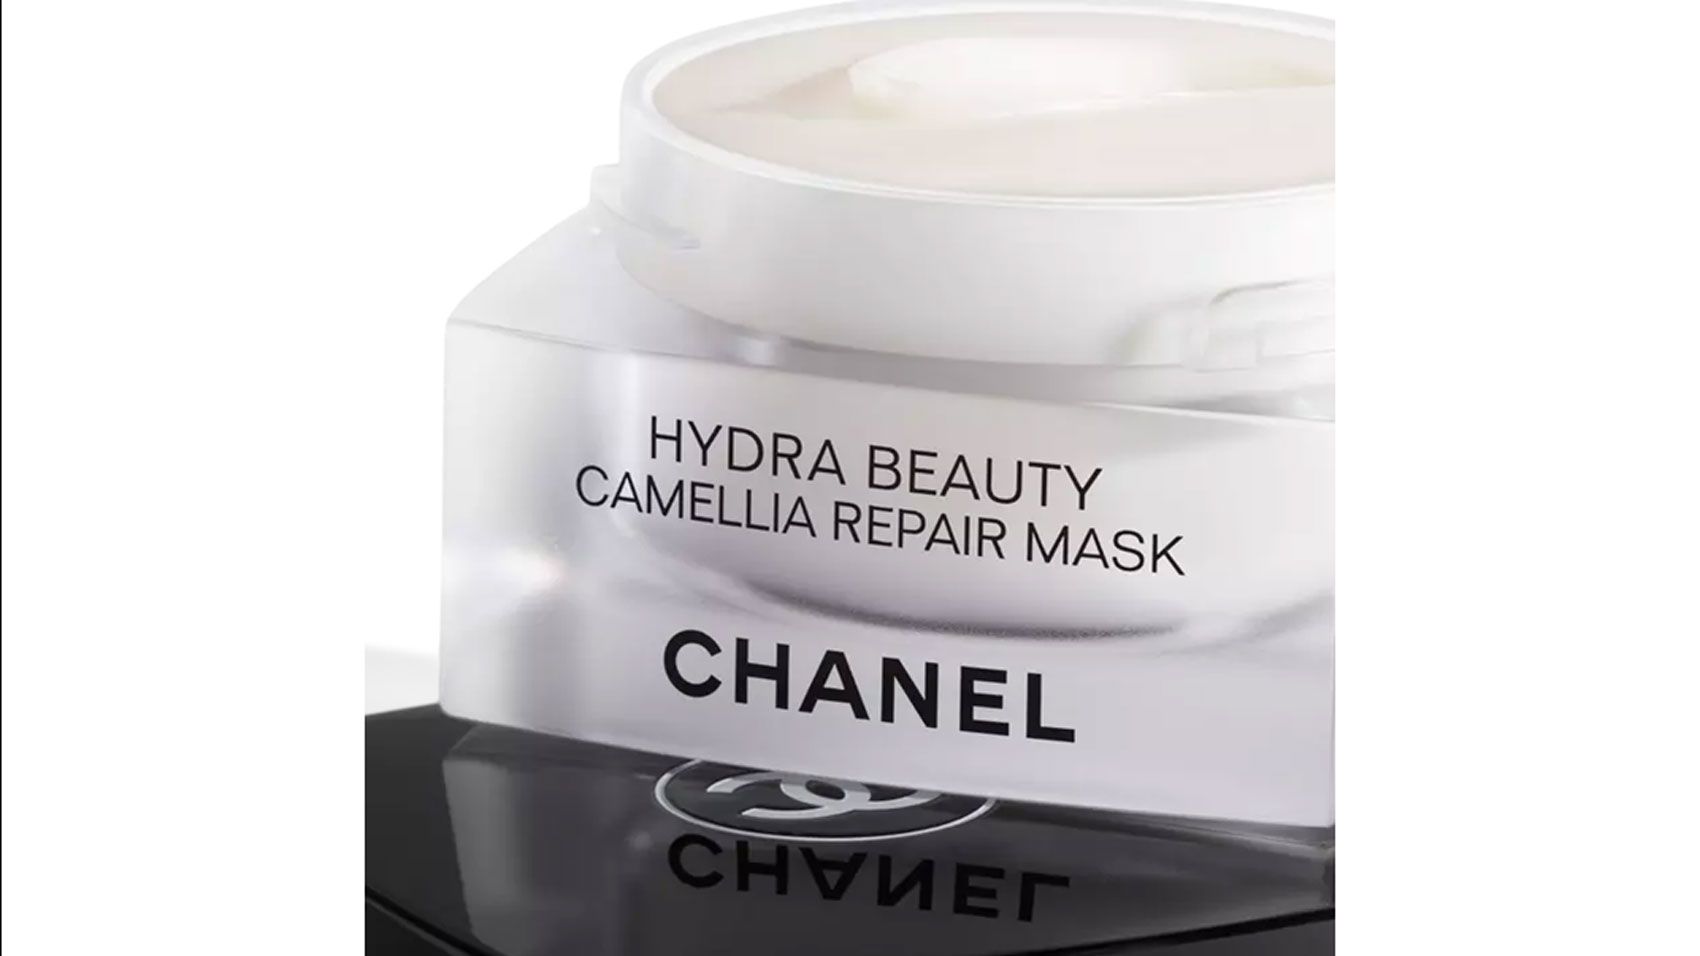 HYDRA BEAUTY Camellia Repair Mask by Chanel